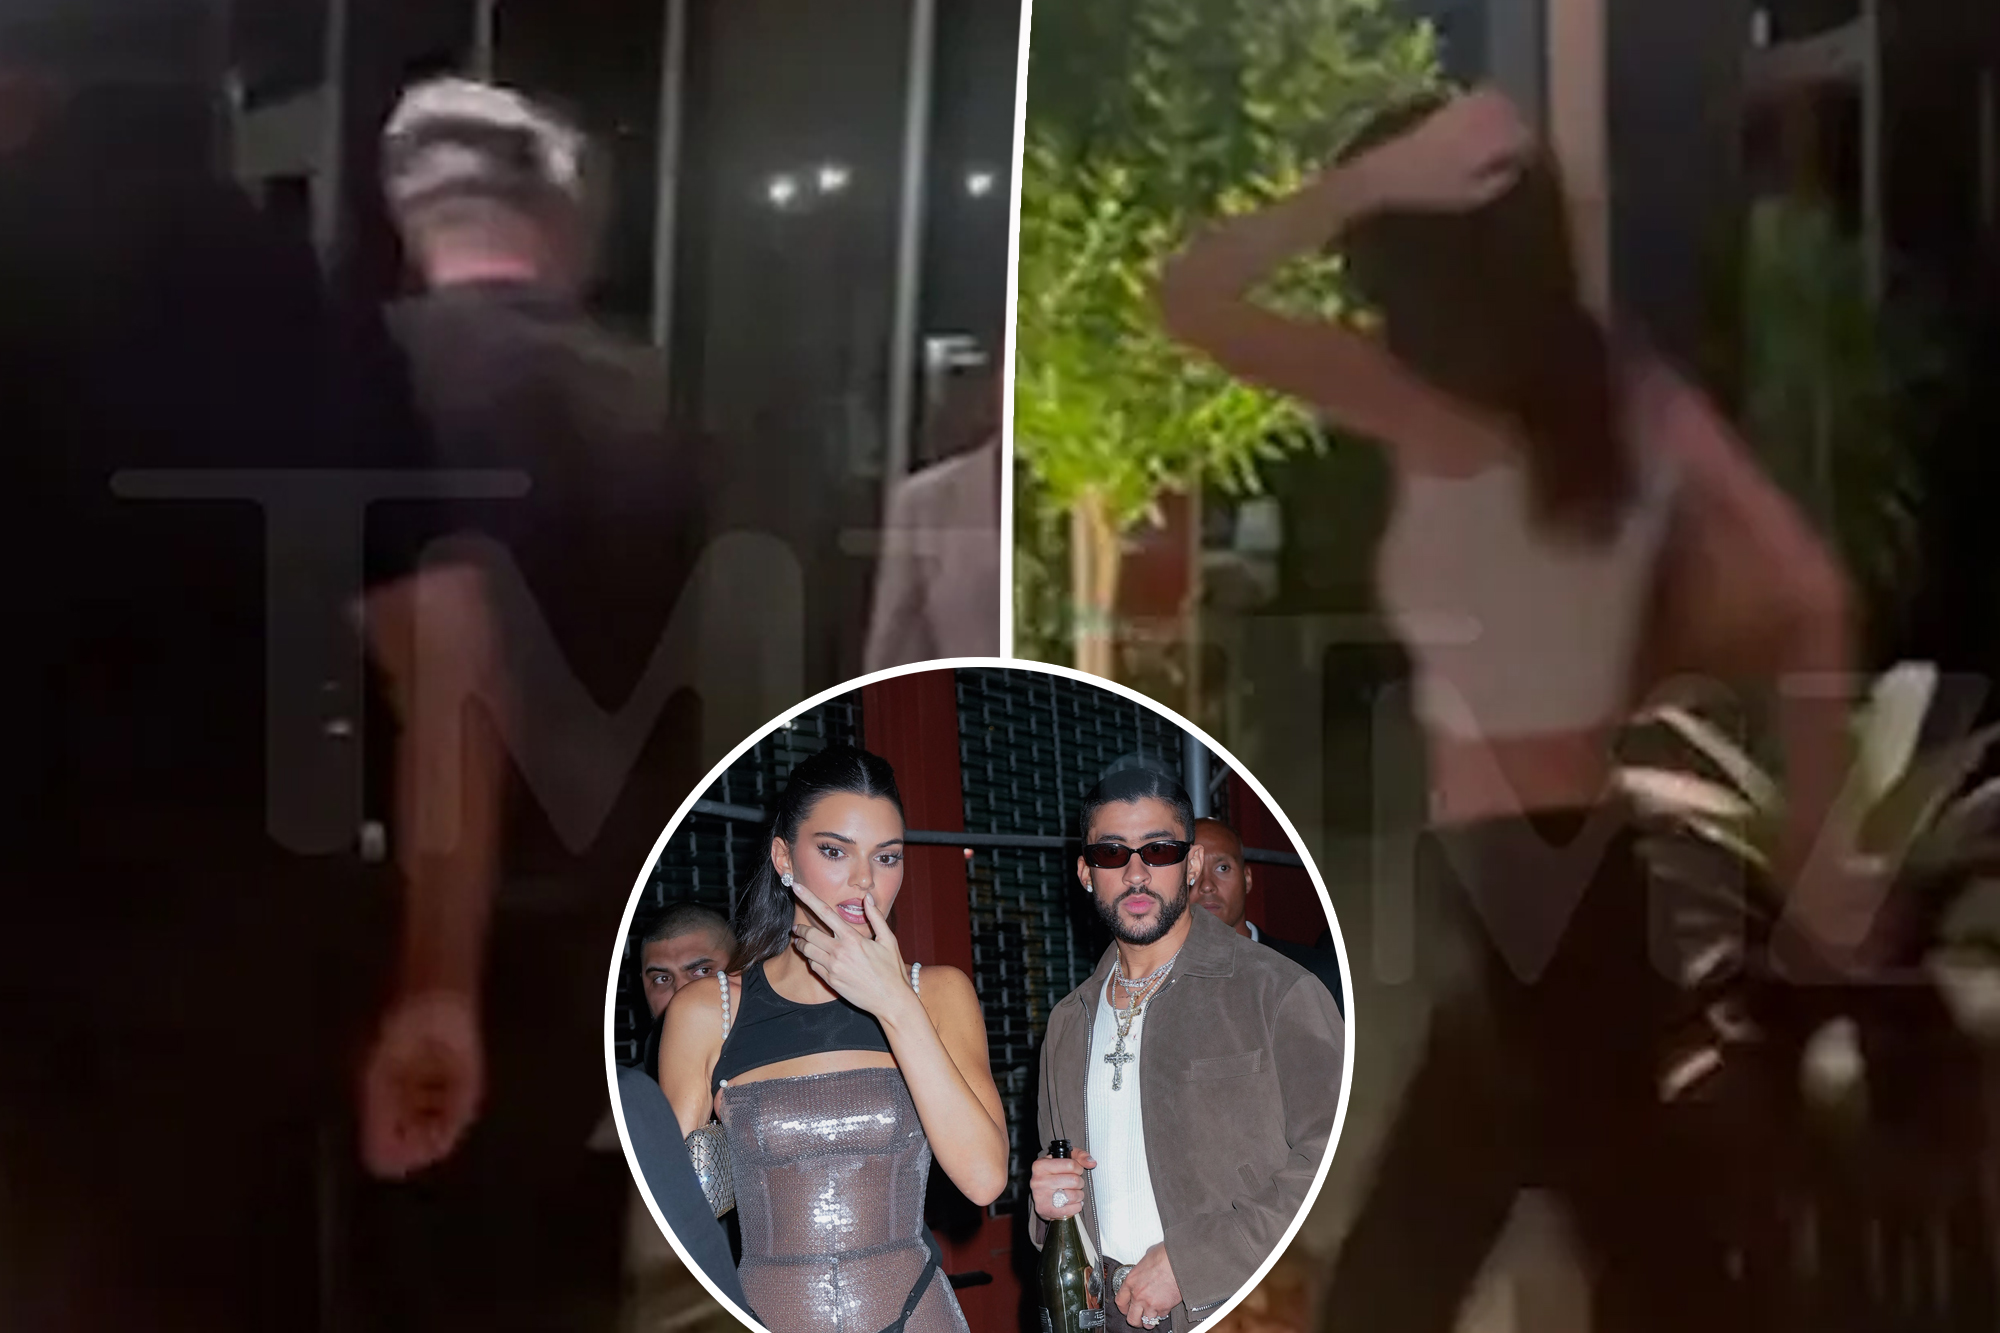 Kendall Jenner and Bad Bunny's Night Out Sparks Romance Rumors